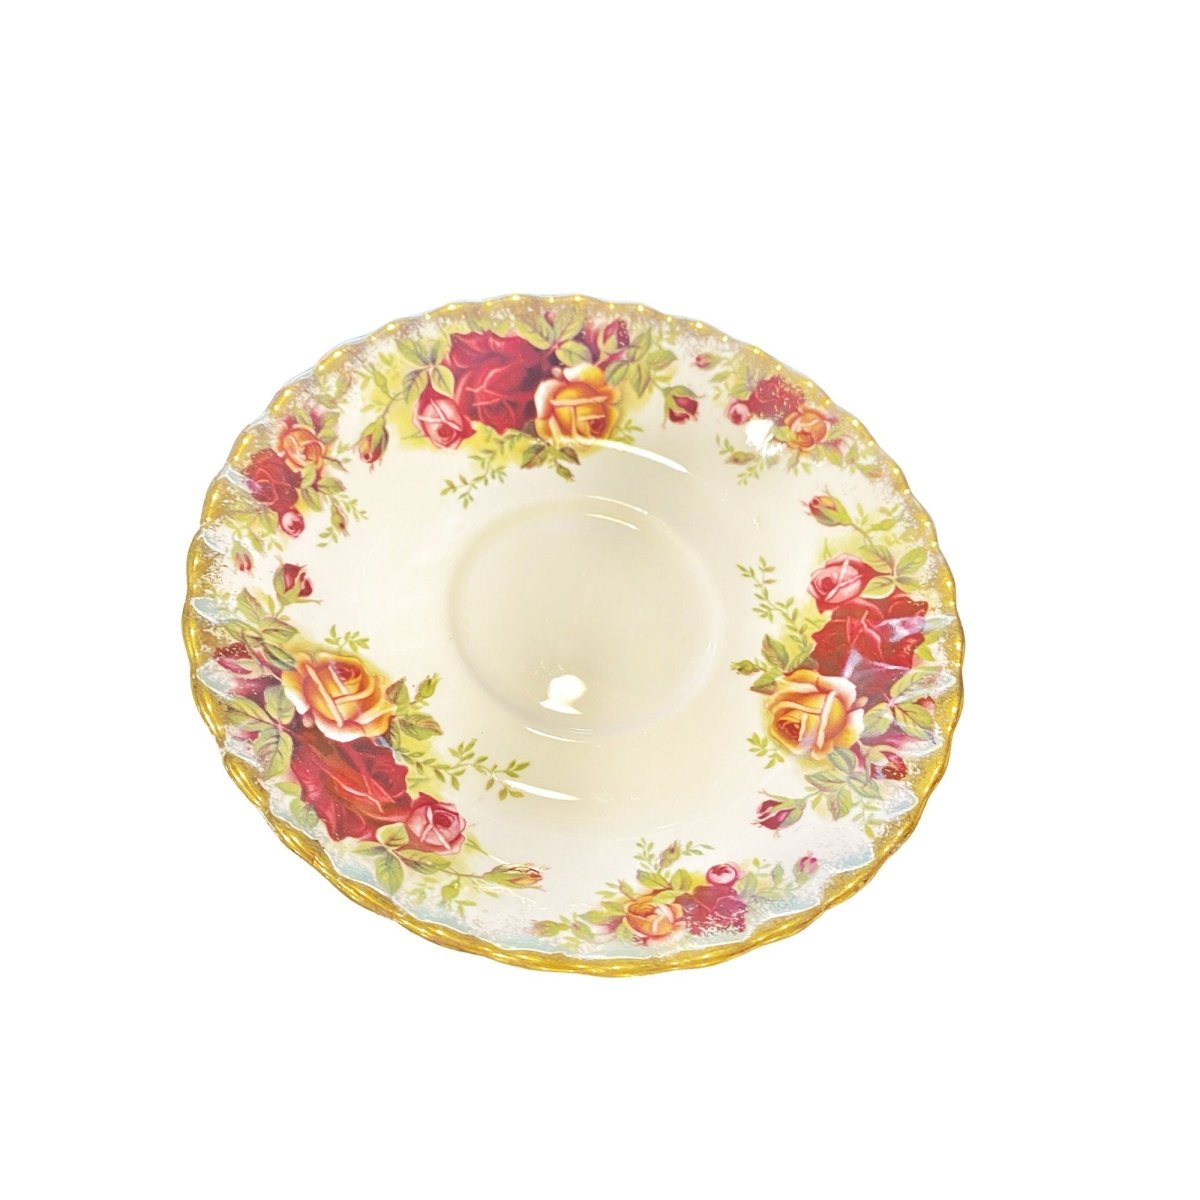 Royal Stafford | Old Country Roses | teacup & saucer, English classic porcelain for Vintage tea Parties, Mix and Match Teacups - Chinamania.shop